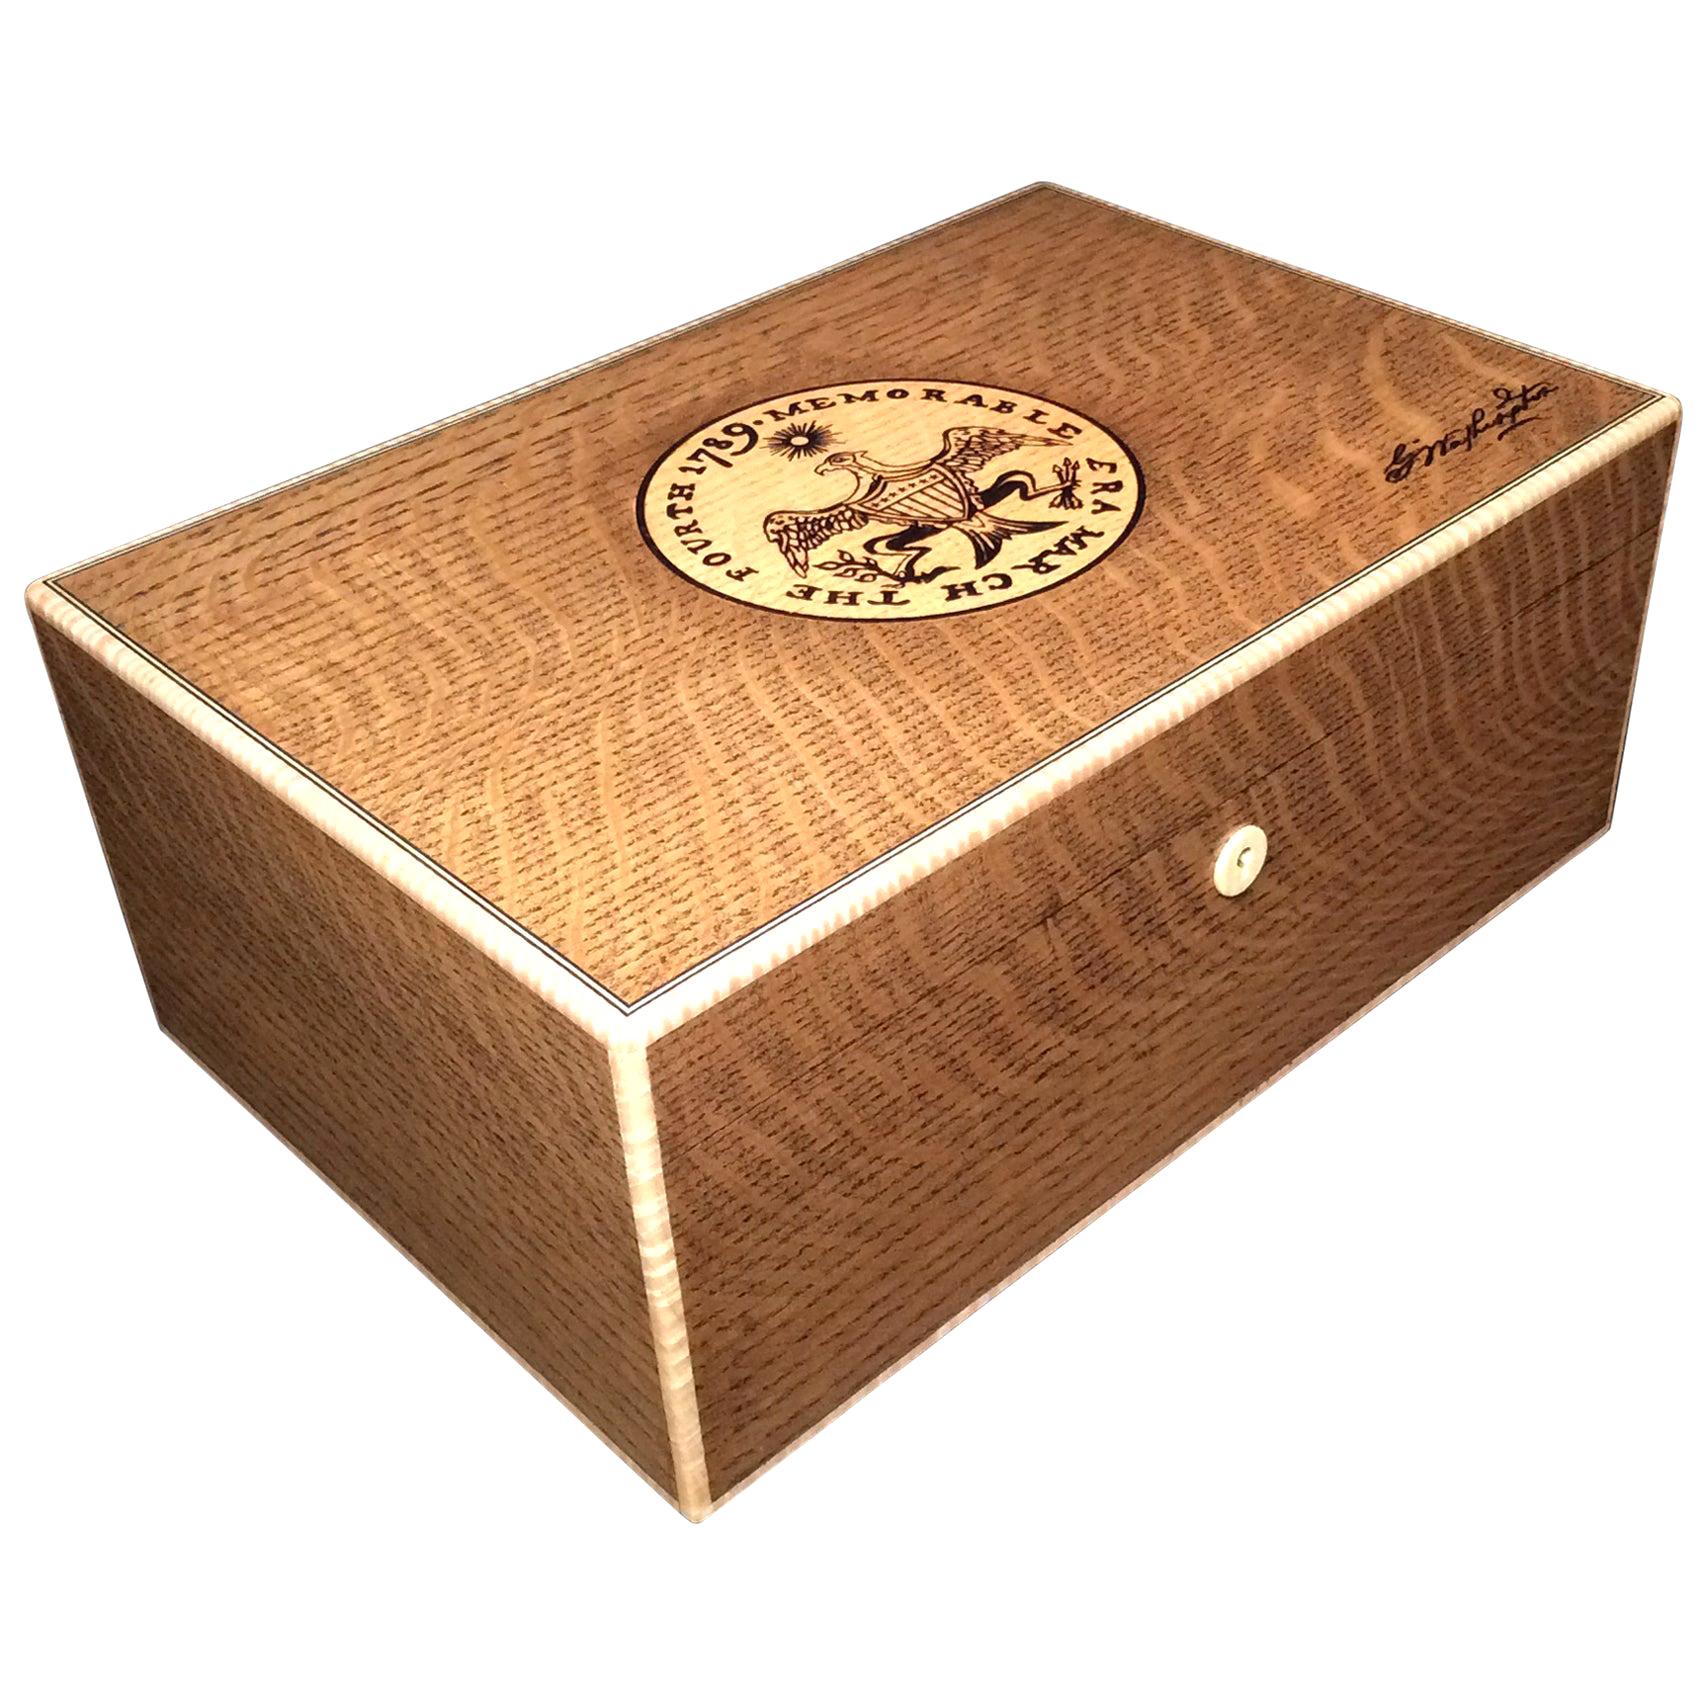 Handcrafted Cigar Humidor, Stamped with George Washington's Inaugural Seal